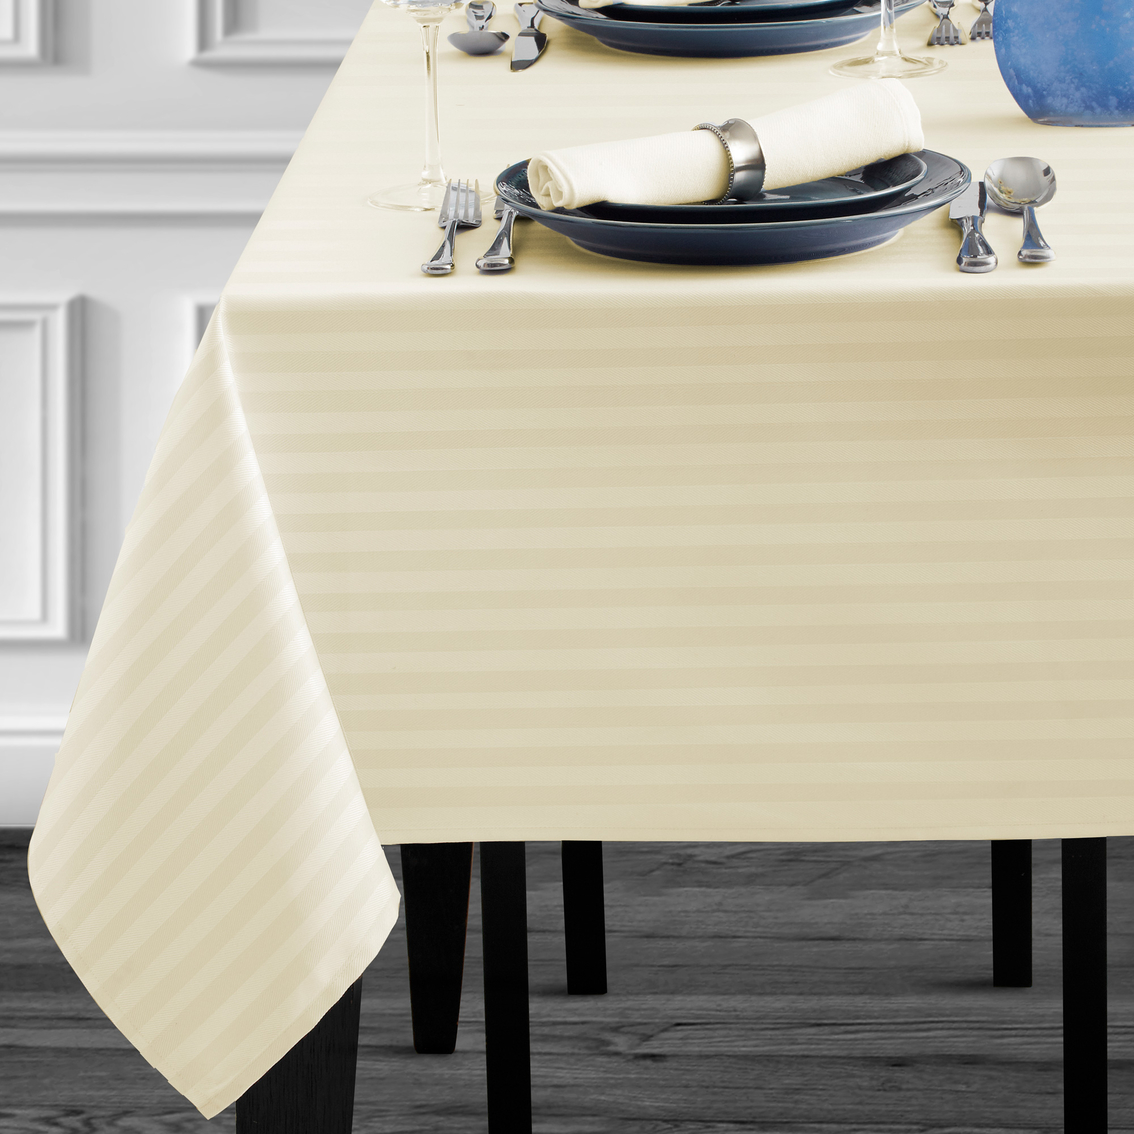 Benson Mills Rosedale Spillproof Tablecloth 60 x 84 in.